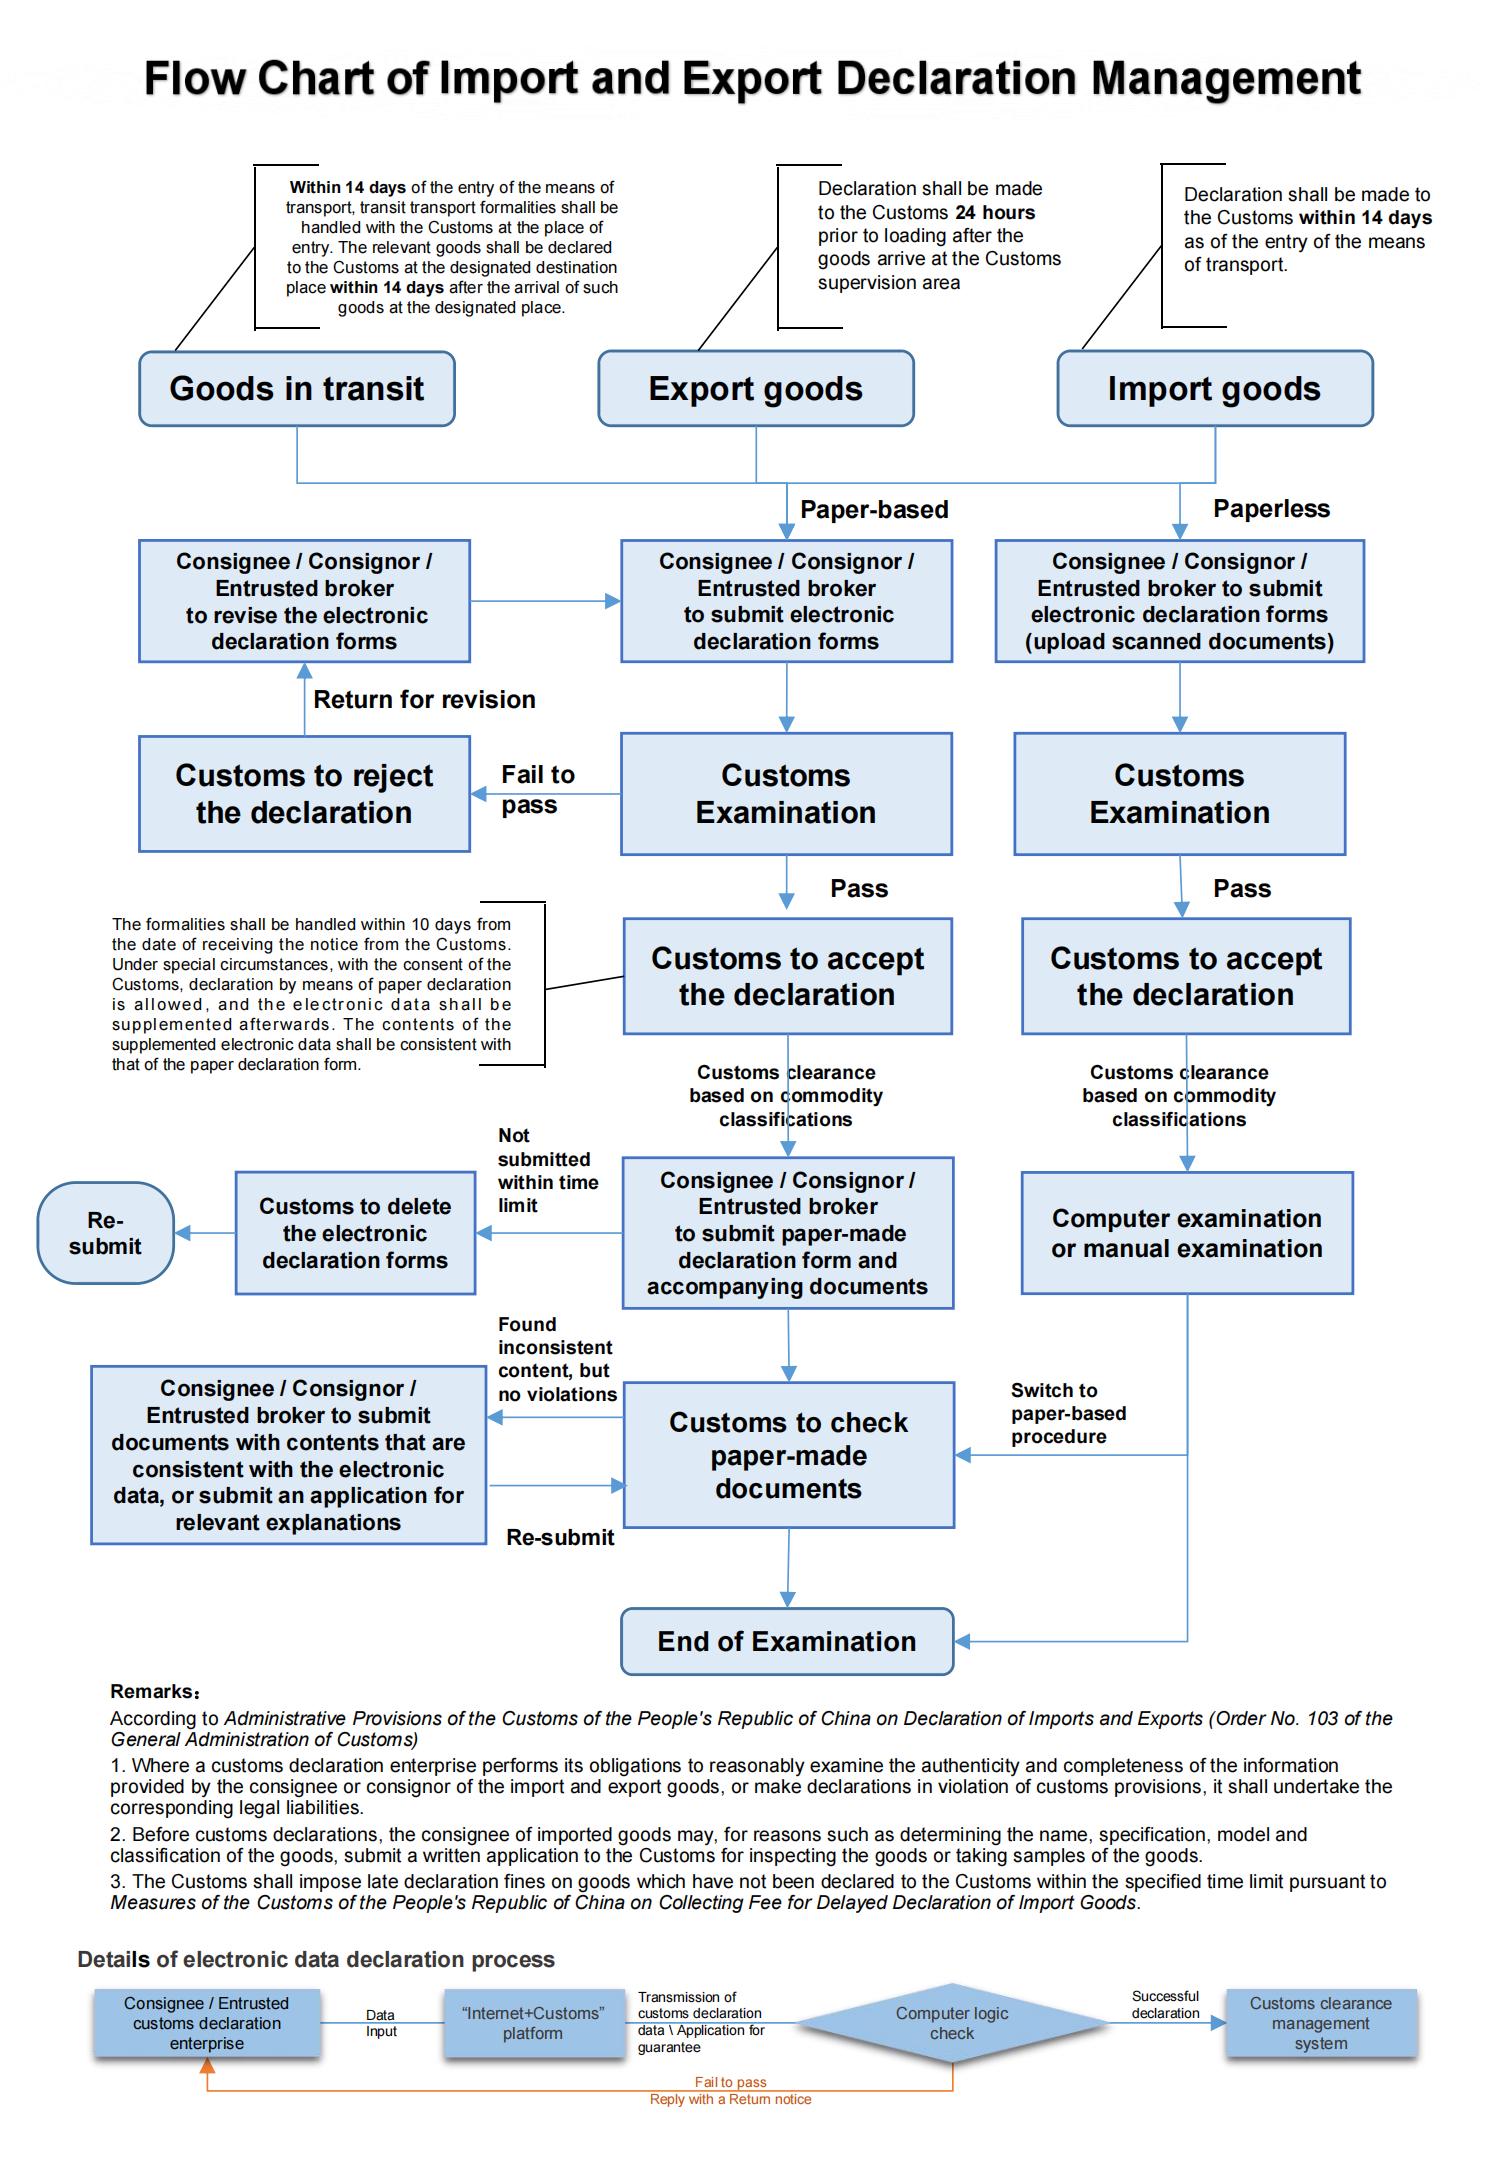 Flow Chart of Import and Export Declaration Management.jpg